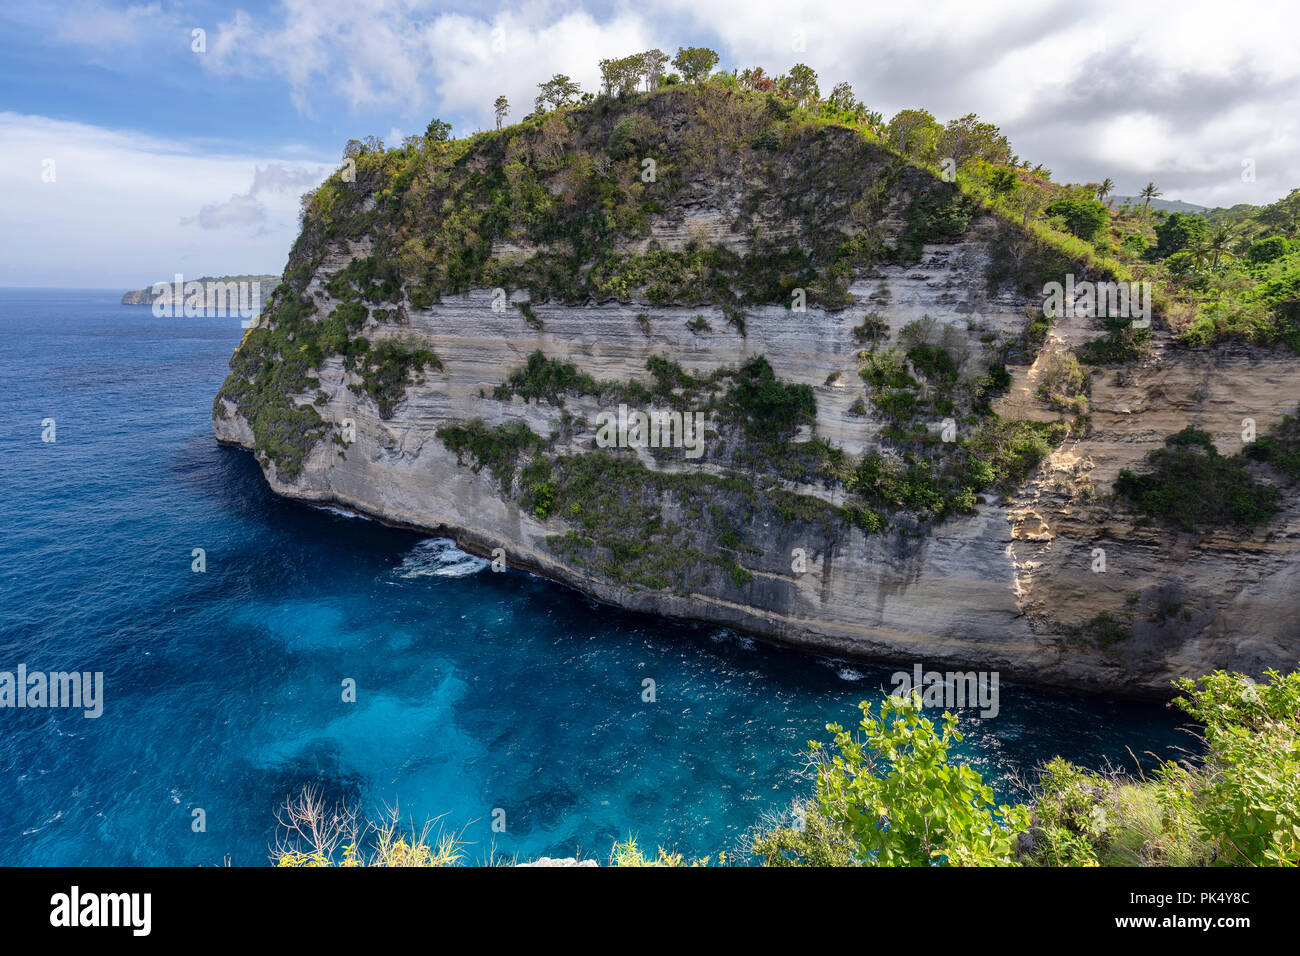 The cliff and beautiful blue clear water below the Belah Poh point, a popular place to watch the sunrise on Nusa Penida. Stock Photo